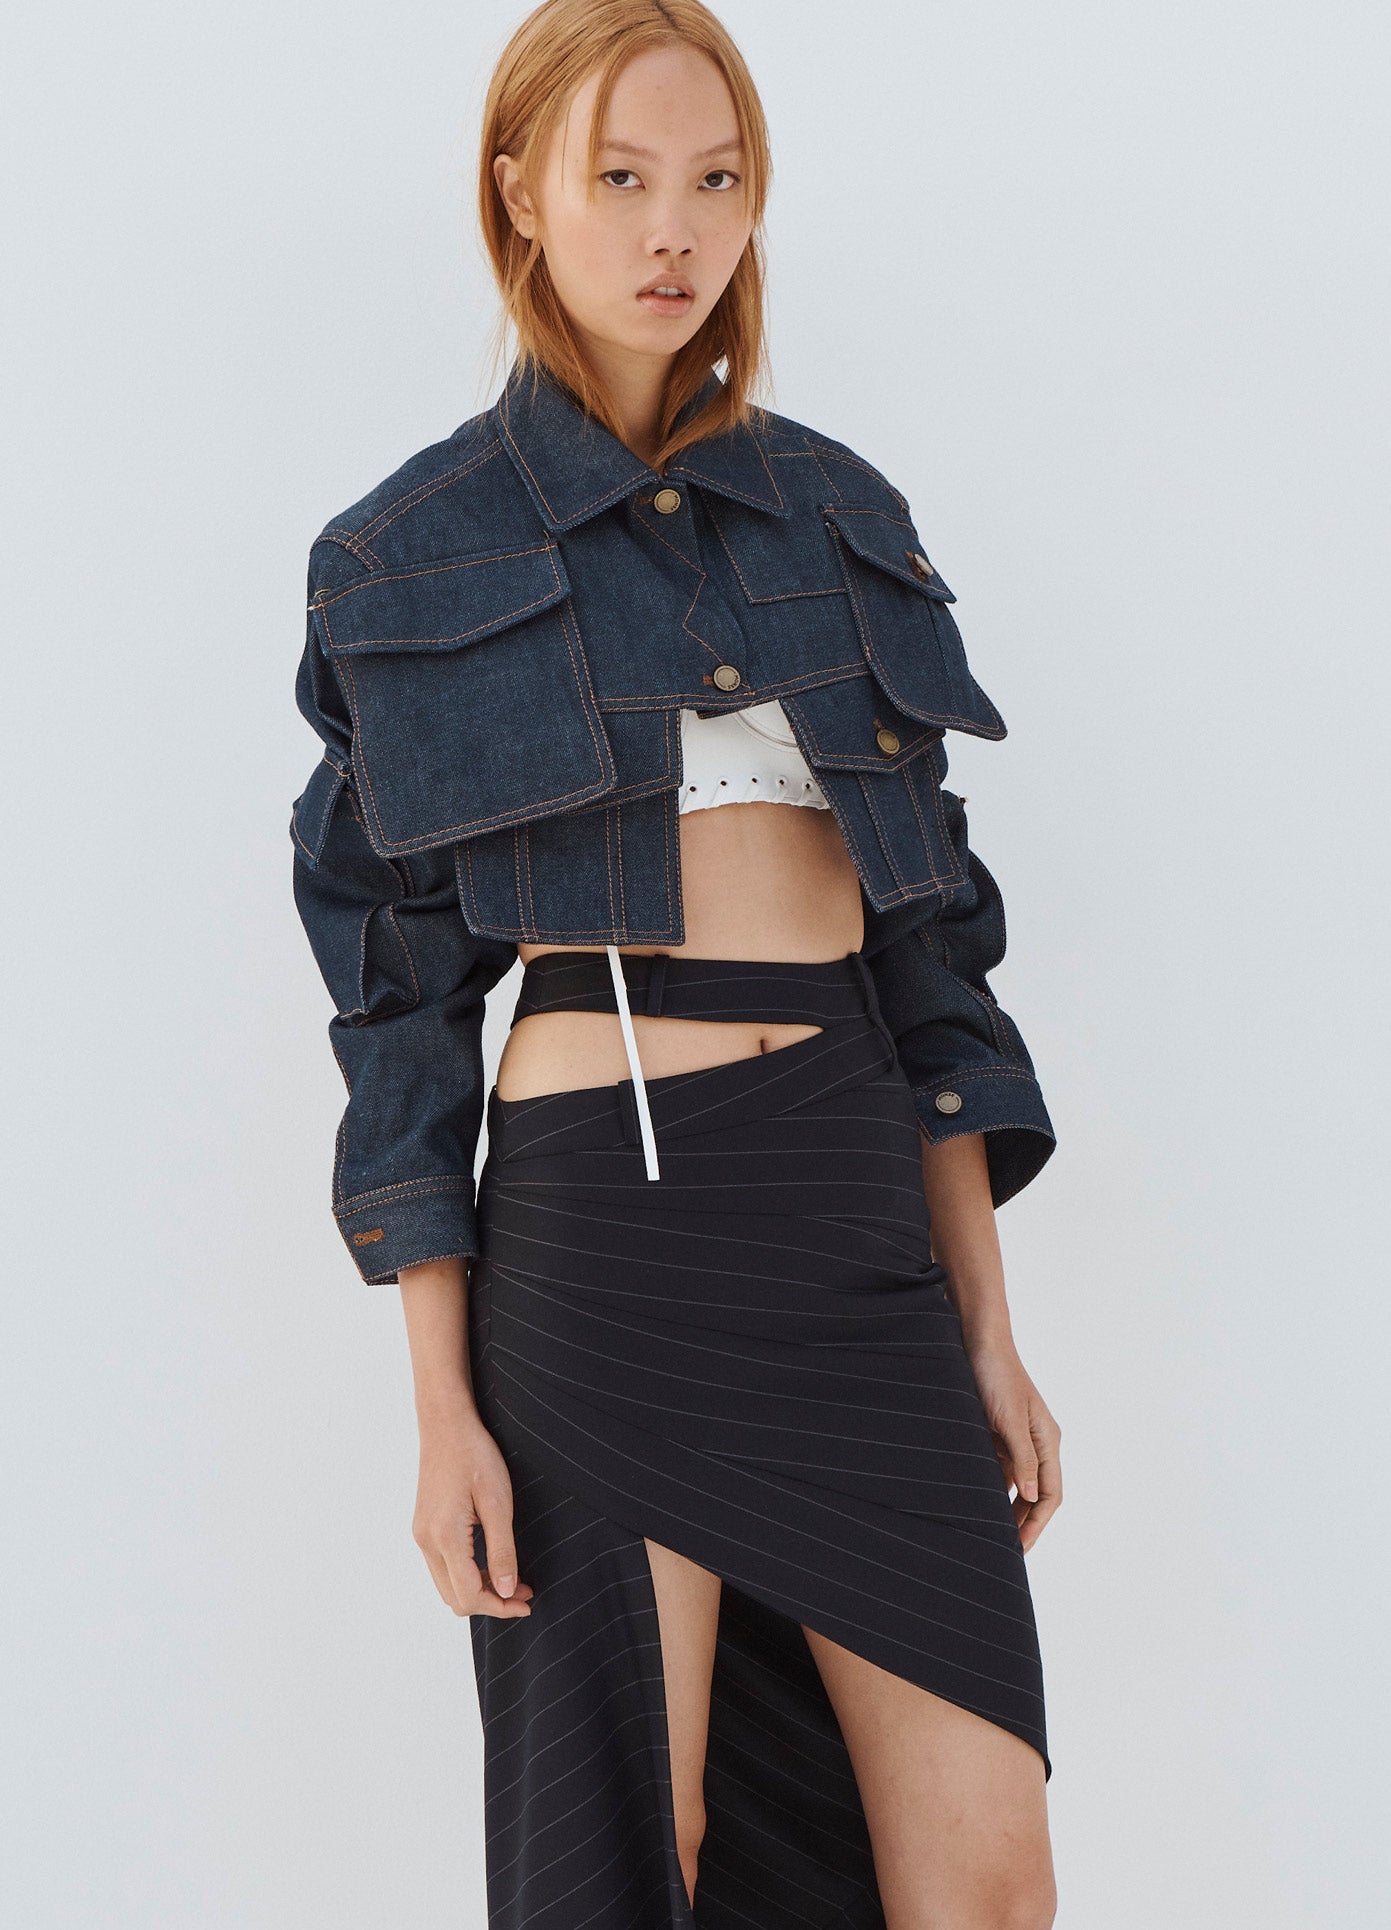 MONSE Double Waistband Asymmetrical Skirt in Midnight on Model Front Side View